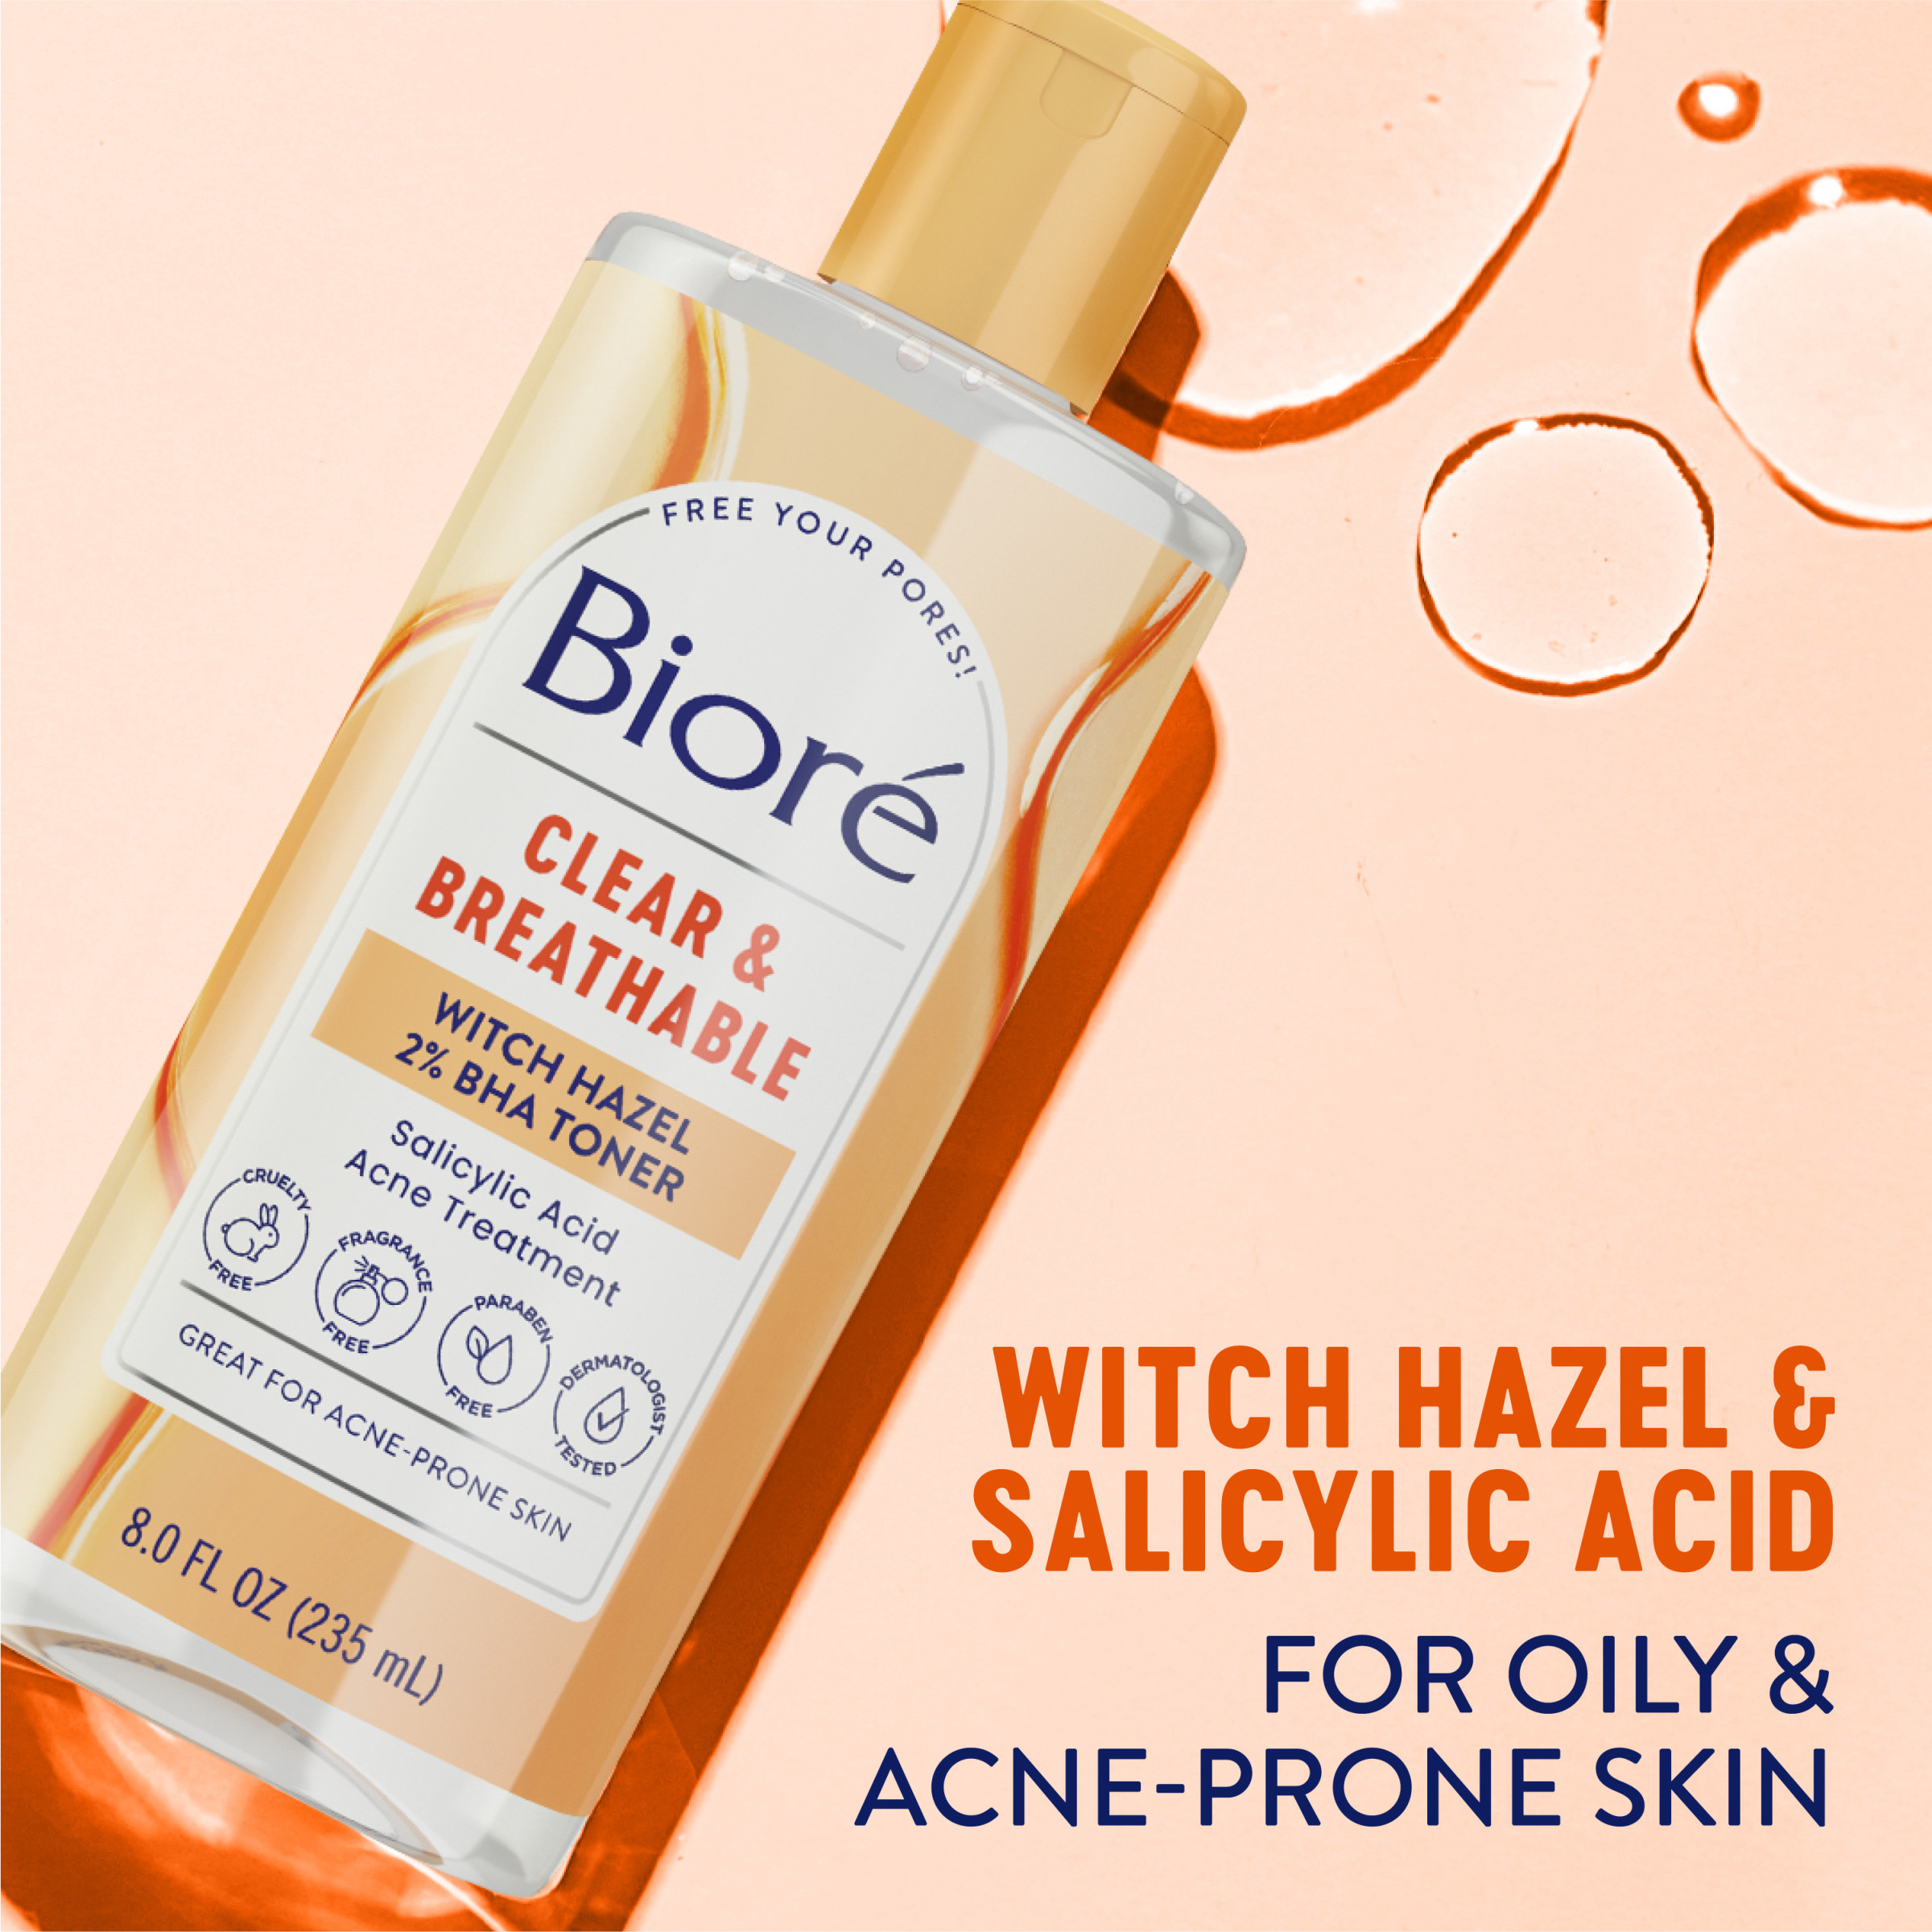 Biore Clear & Breathable Witch Hazel Facial Toner, Toner for Acne Prone Skin, 8 fl oz (HSA/FSA Approved) - image 6 of 11